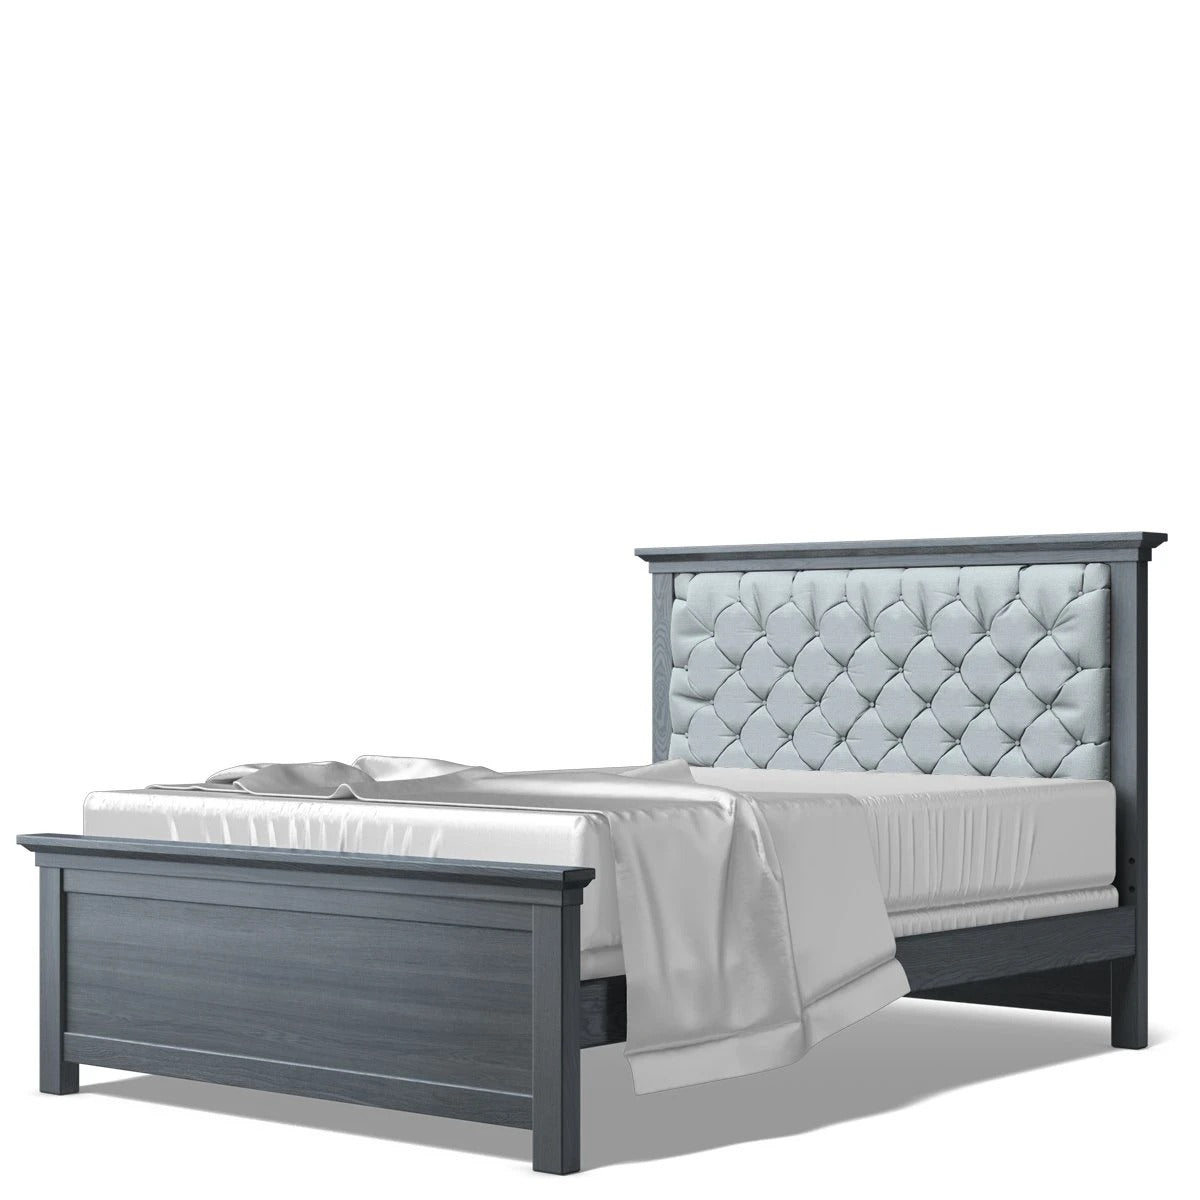 Full Bed Tufted Headboard Storm with Grey